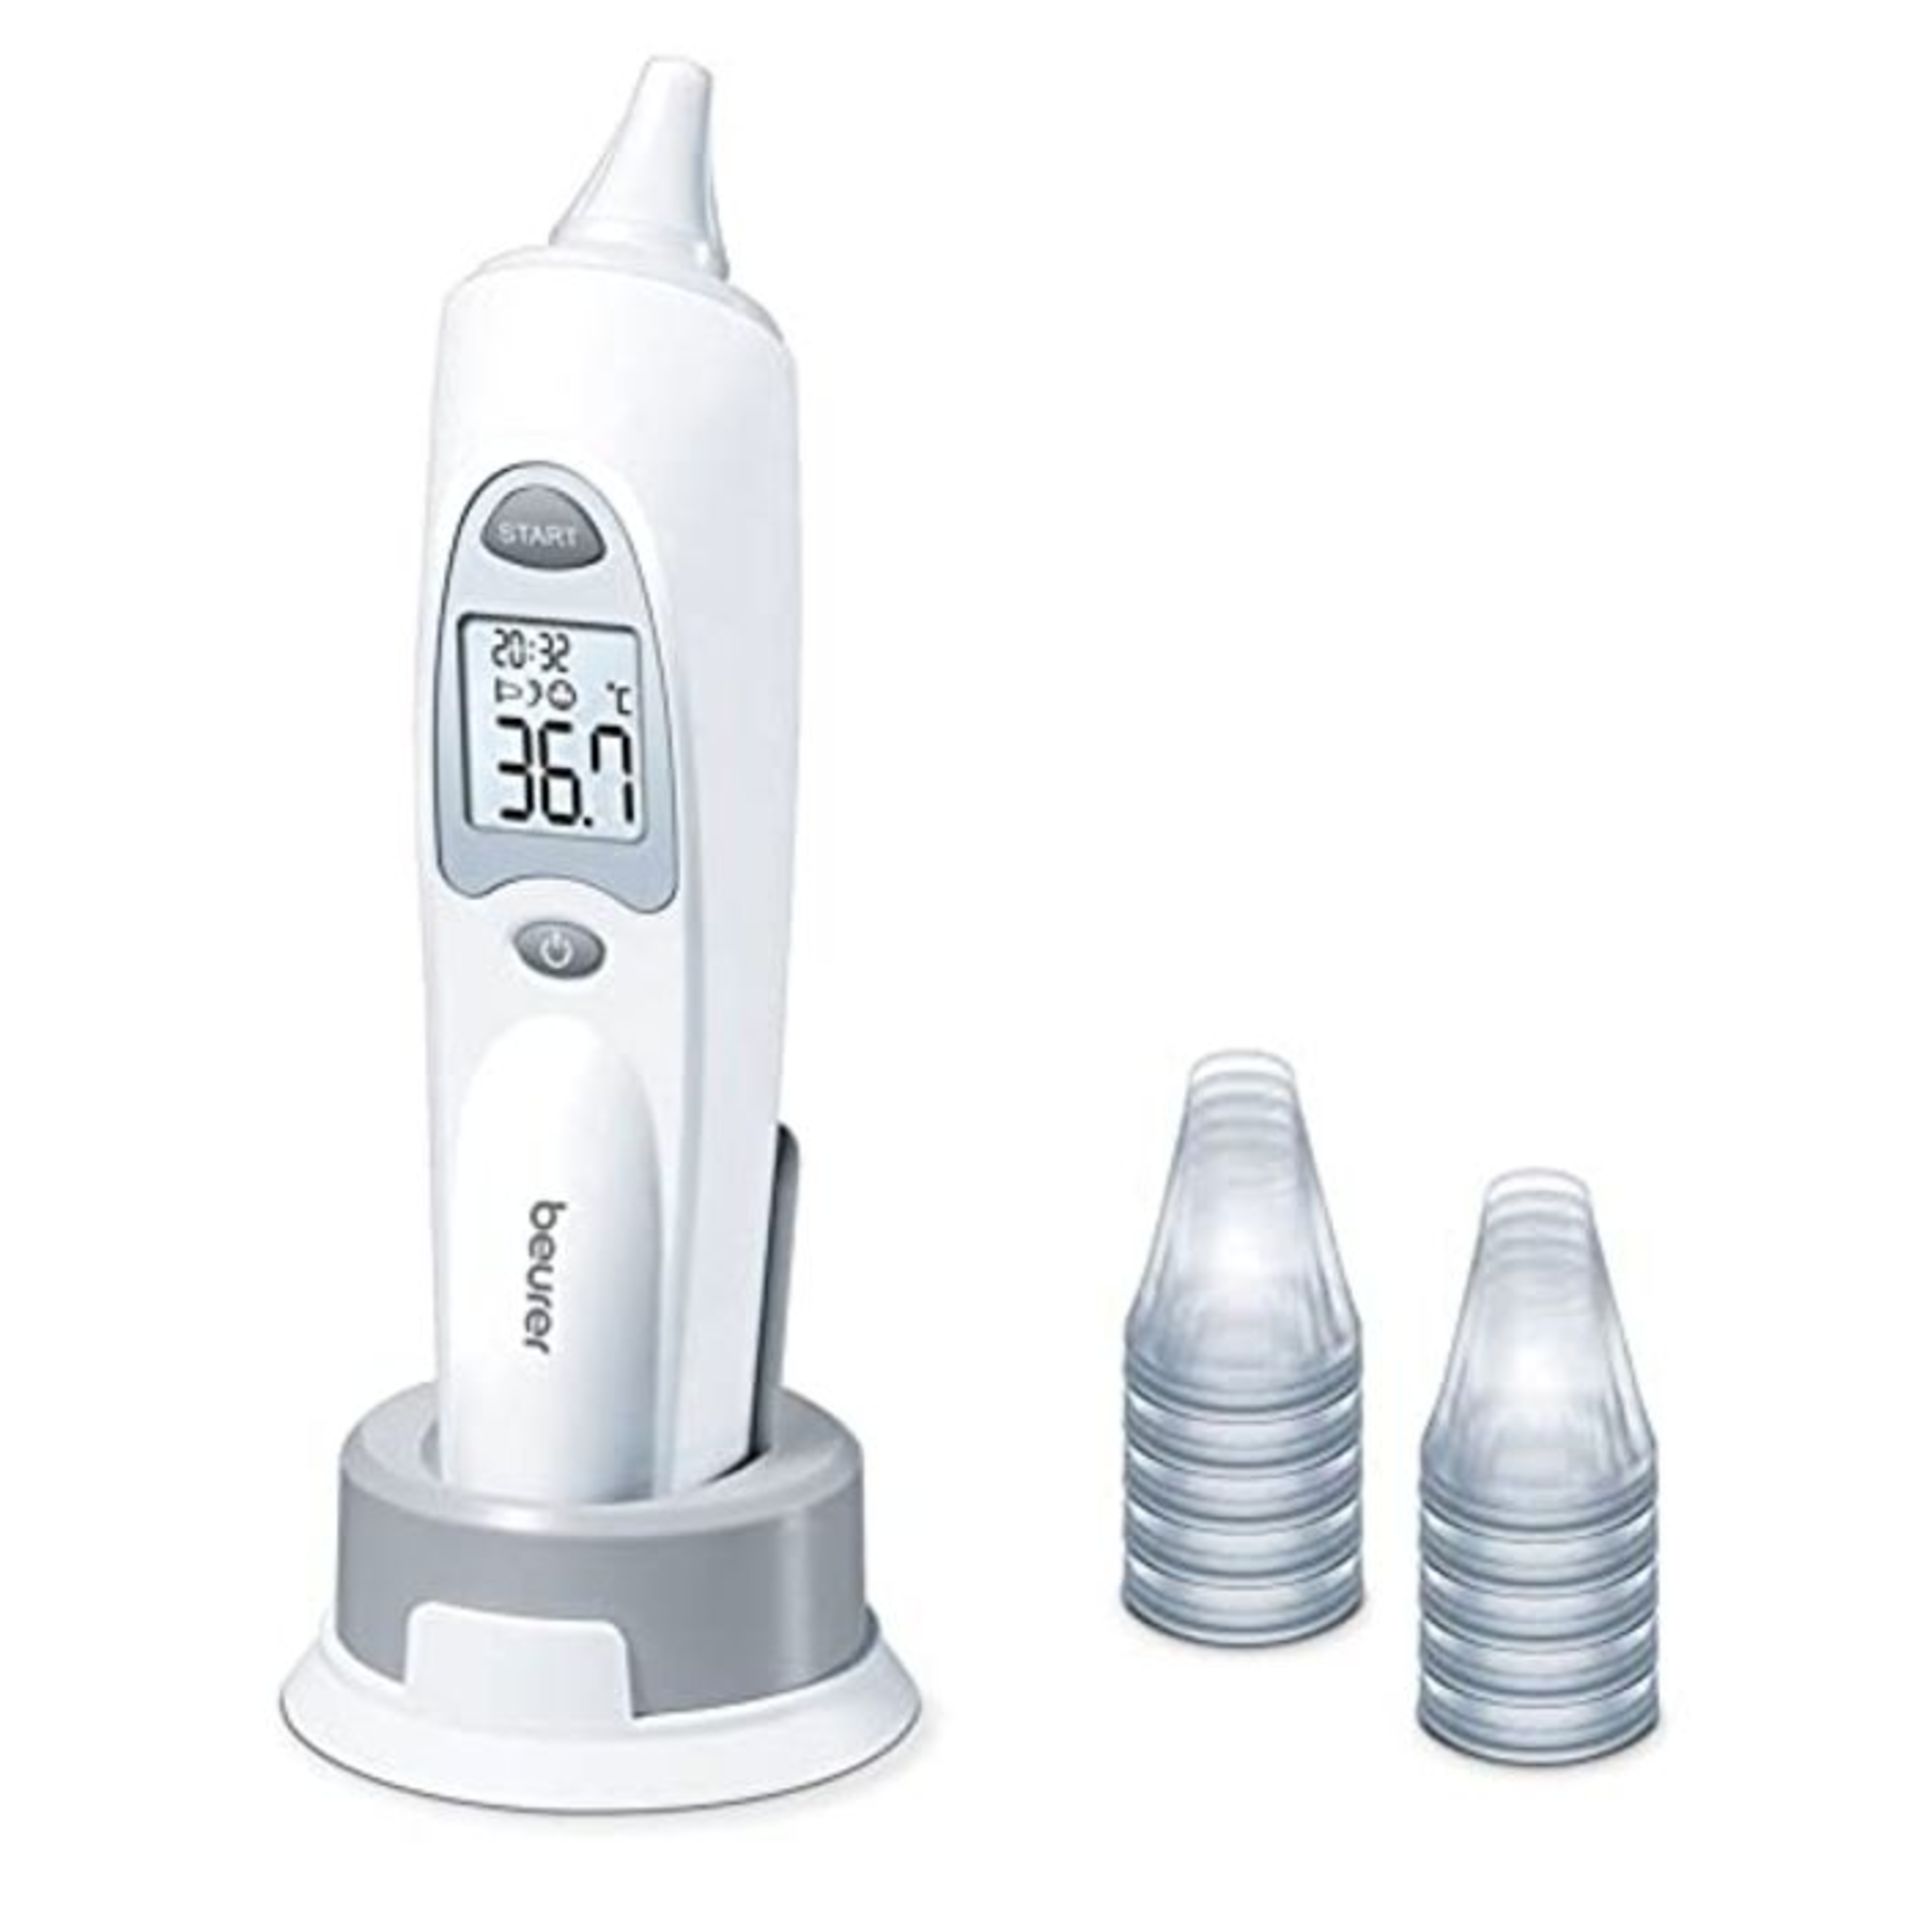 Beurer FT58 Ear Thermometer, 795.33